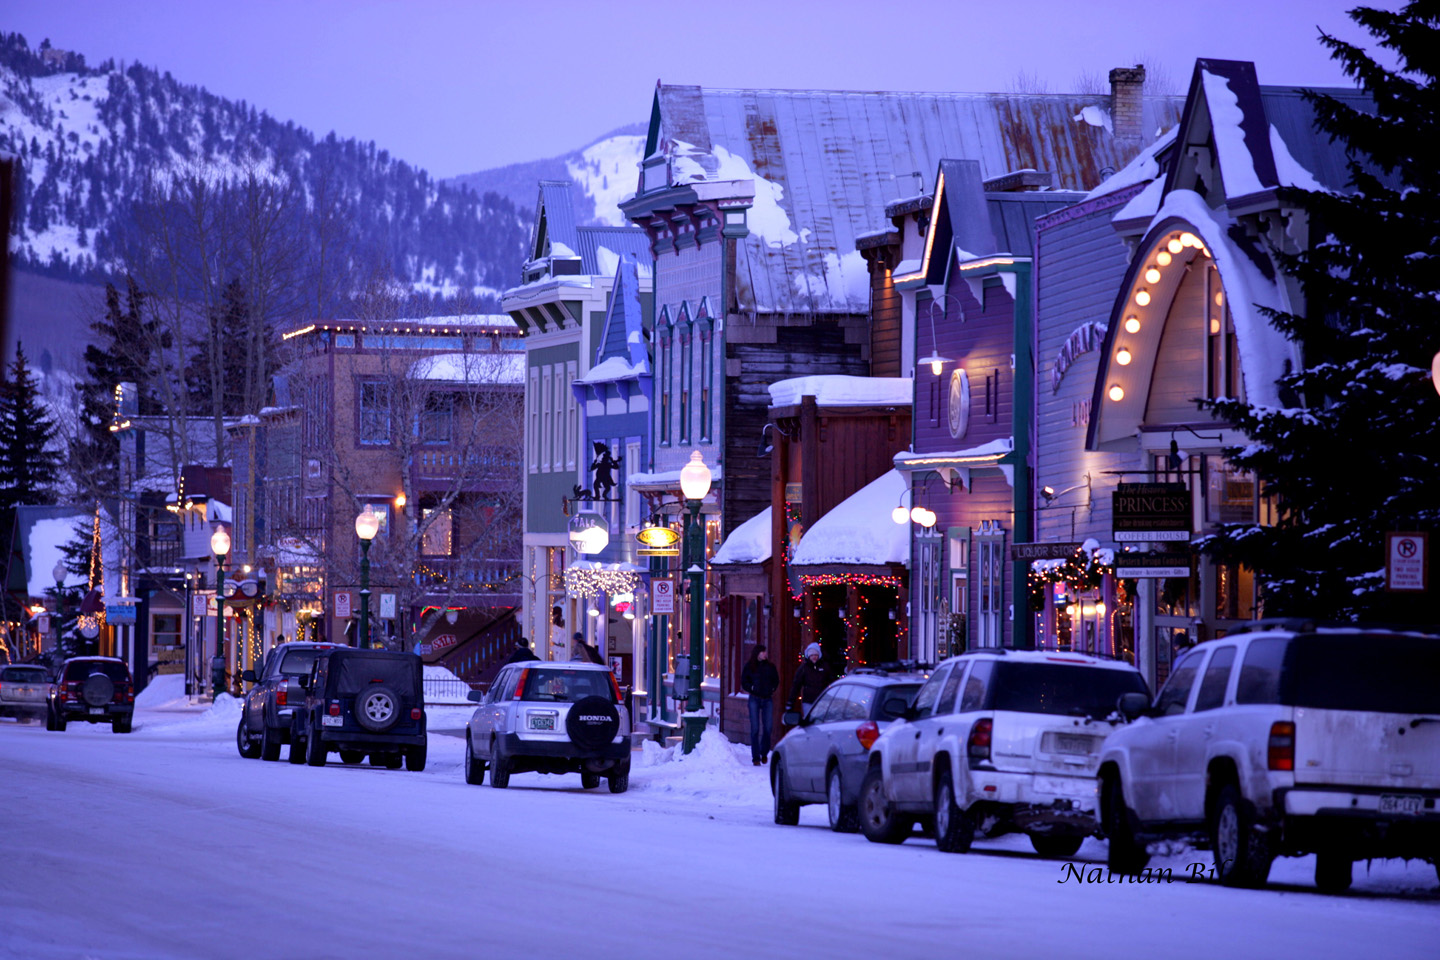 Crested Butte was recently added to the offer of the EPIC Pass.Vail Resorts Ceo Rob Katz Gives $2 Million in Grants to Support Mental & Behavioral Health Programs in Mountain Resort Communities across North America.